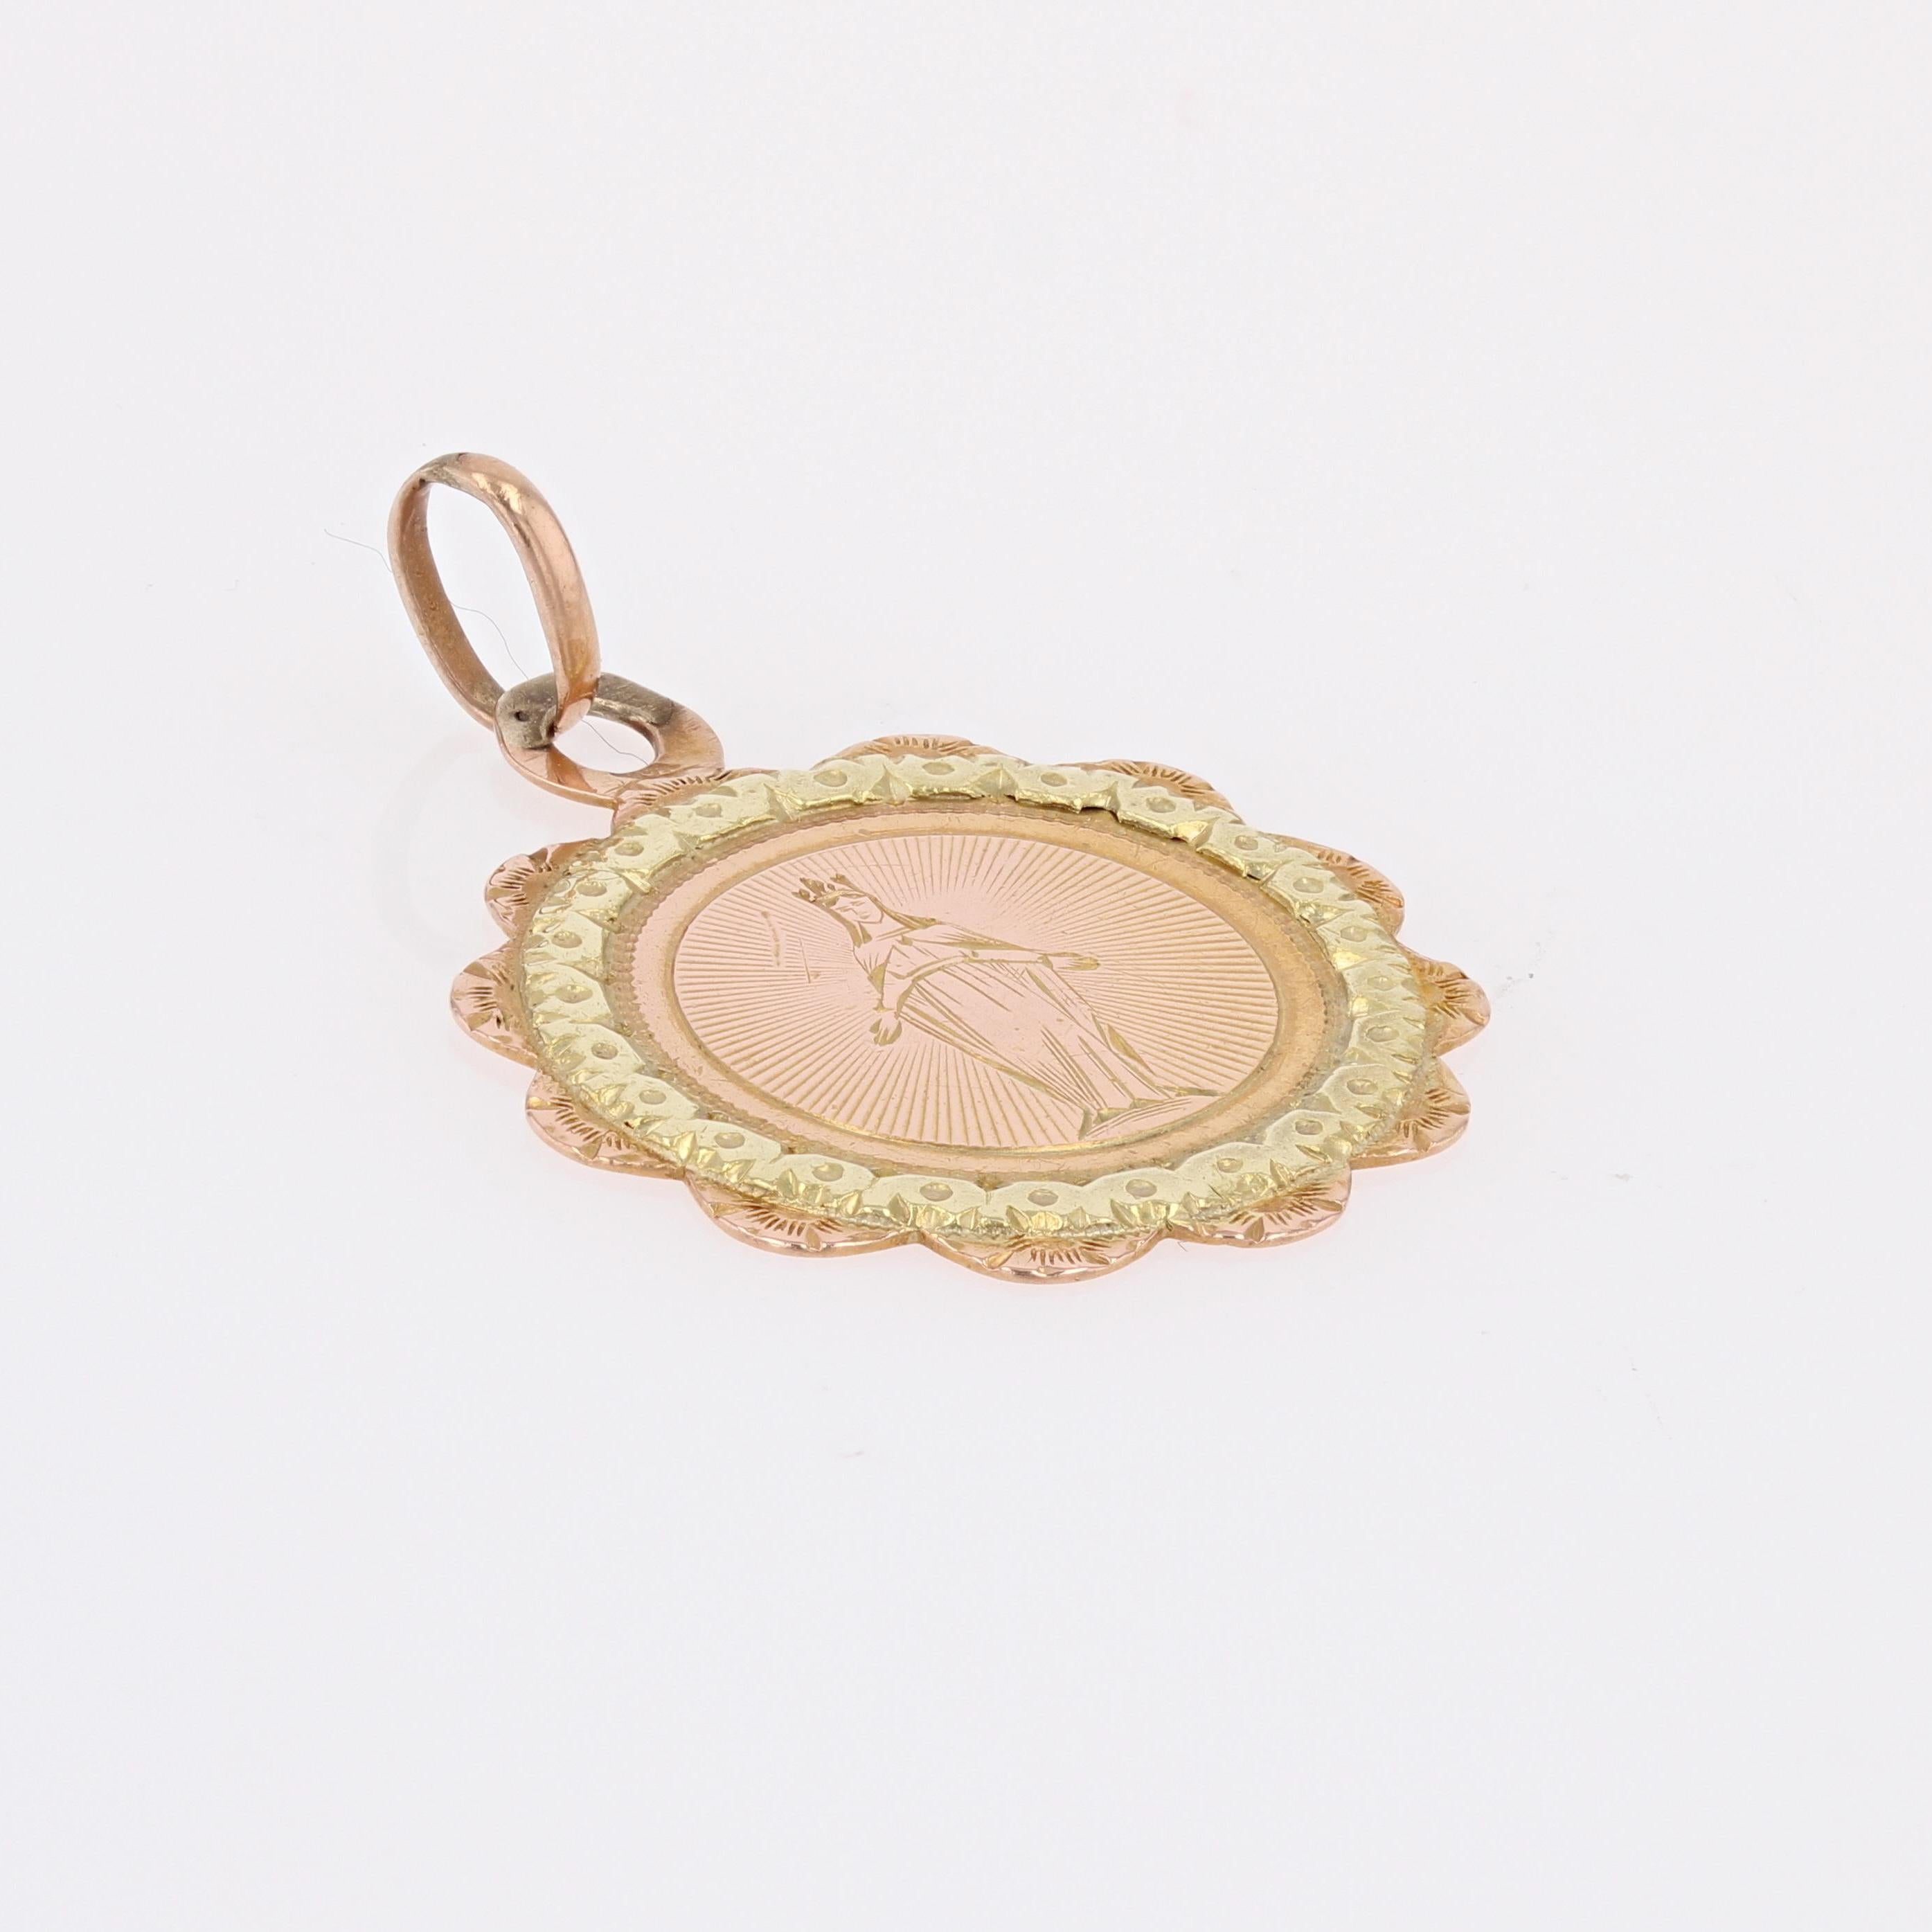 Medal in 18 karat rose and yellow gold.
Baptism medal of round notched shape, it is engraved with the Virgin Mary crowned holding her arms open and encircled by a yellow gold decoration. The back of this antique medal is engraved: 